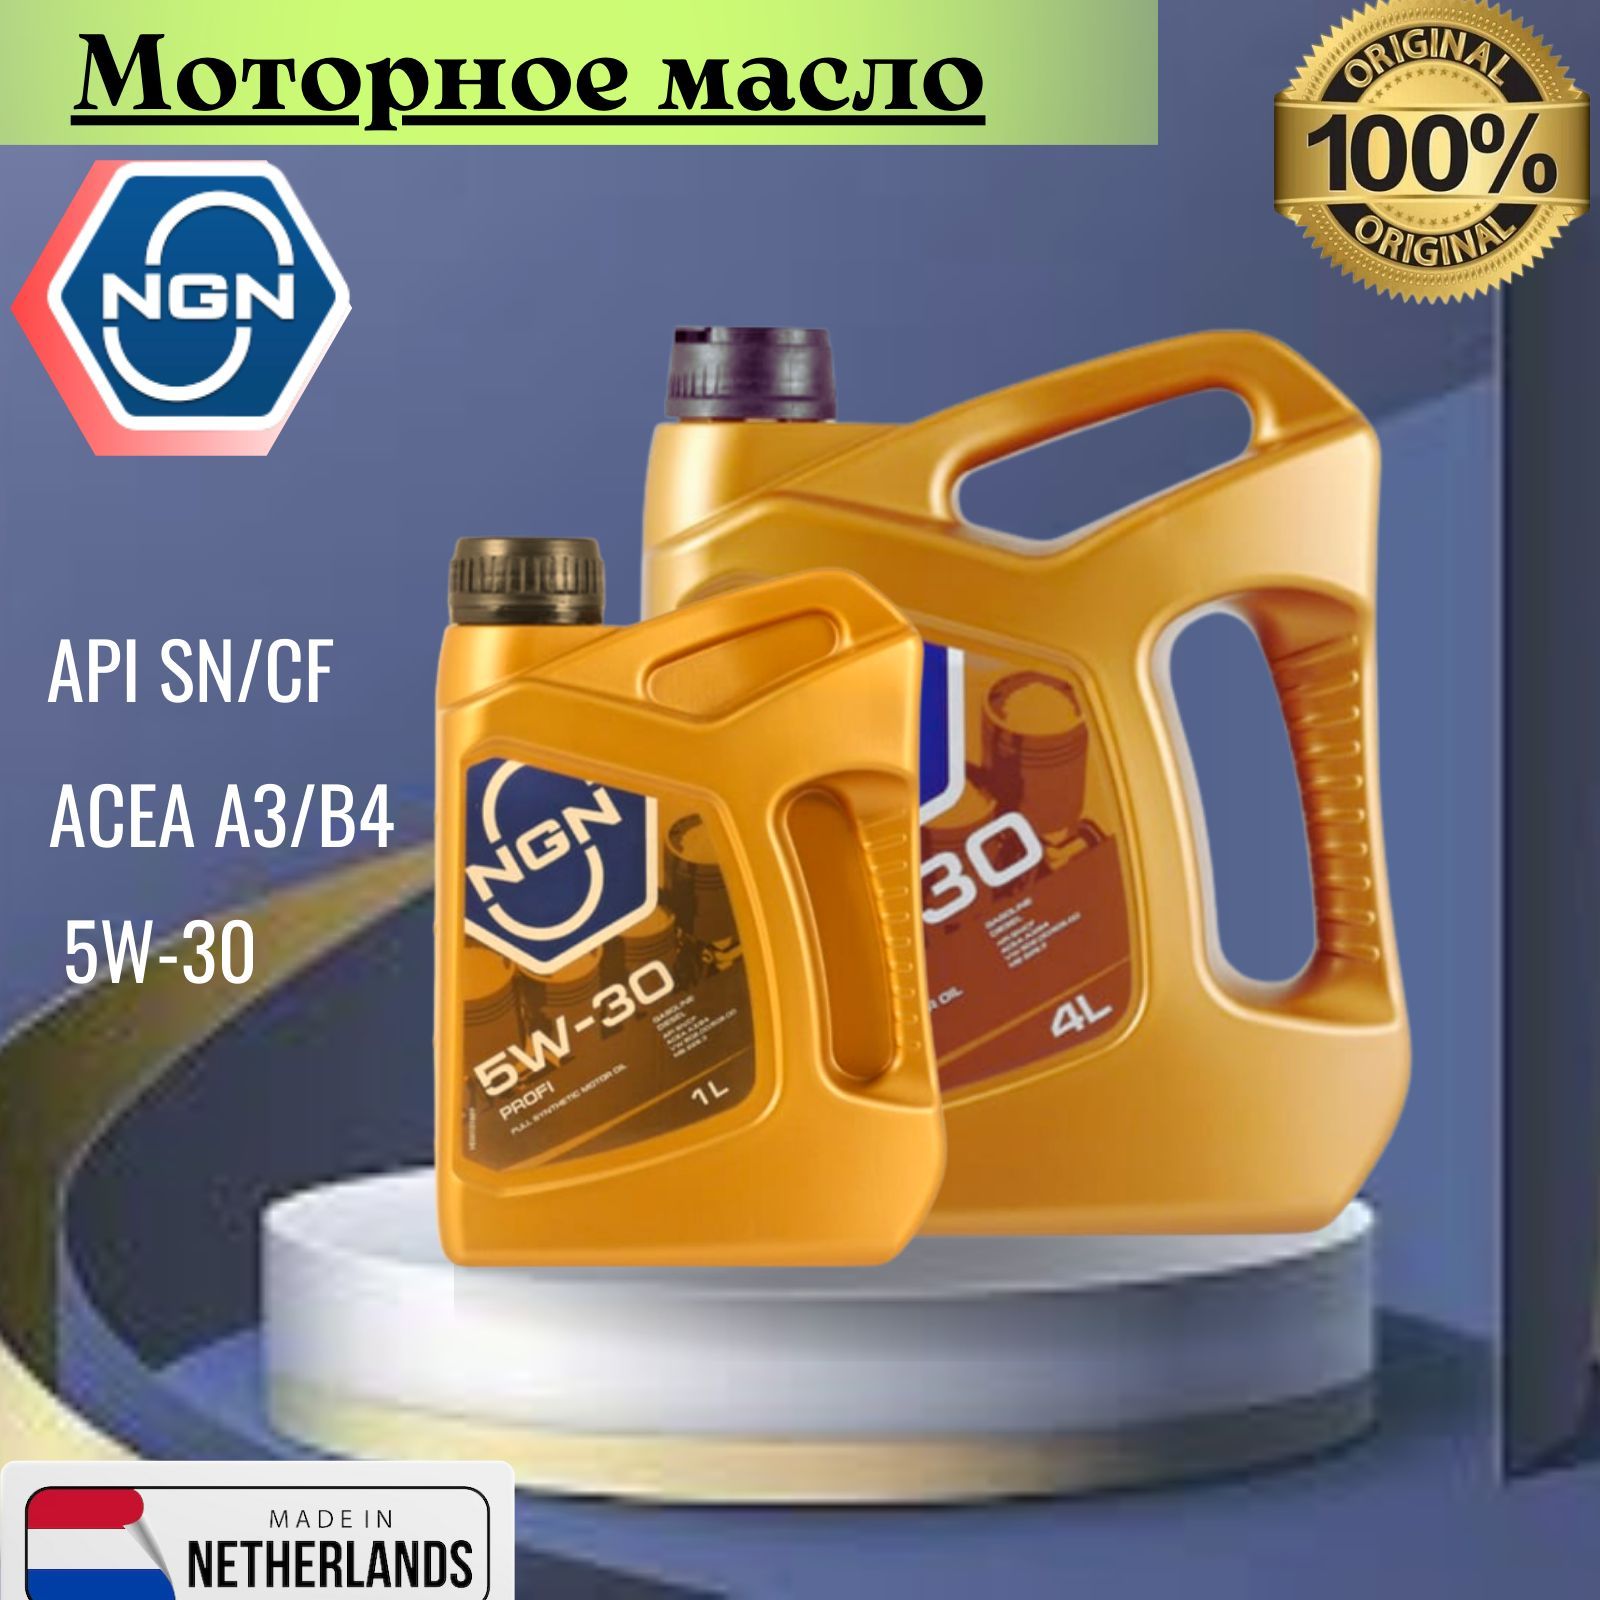 Масло ngn 5w 30. NGN 5w30. Моторное масло NGN 5w30. V272085303 NGN 5w50. Масло НЖН 5в30 профи.